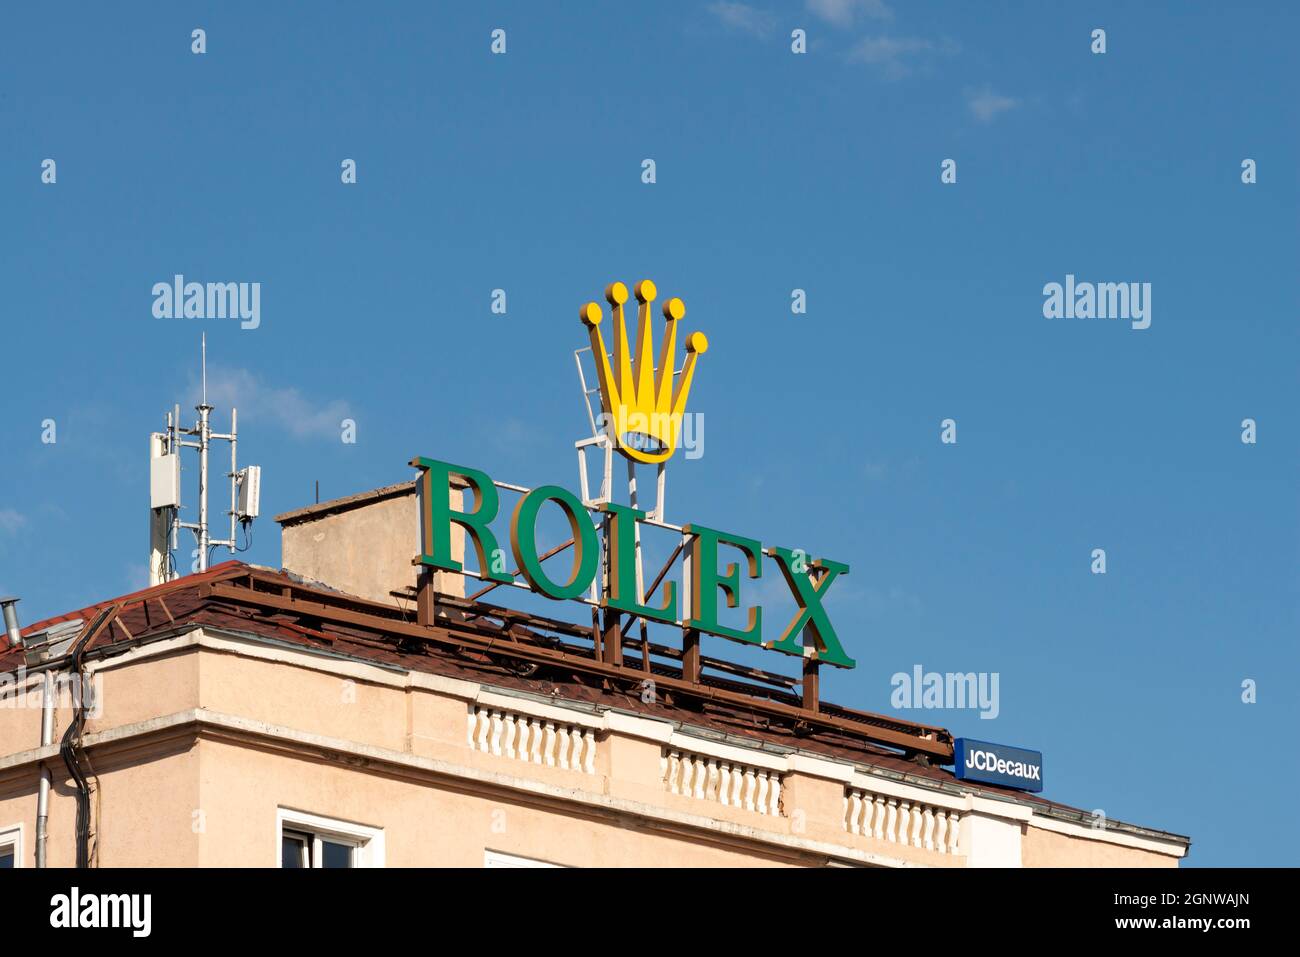 Rolex neon lights advertisement on residential building in Sofia, Bulgaria  Stock Photo - Alamy